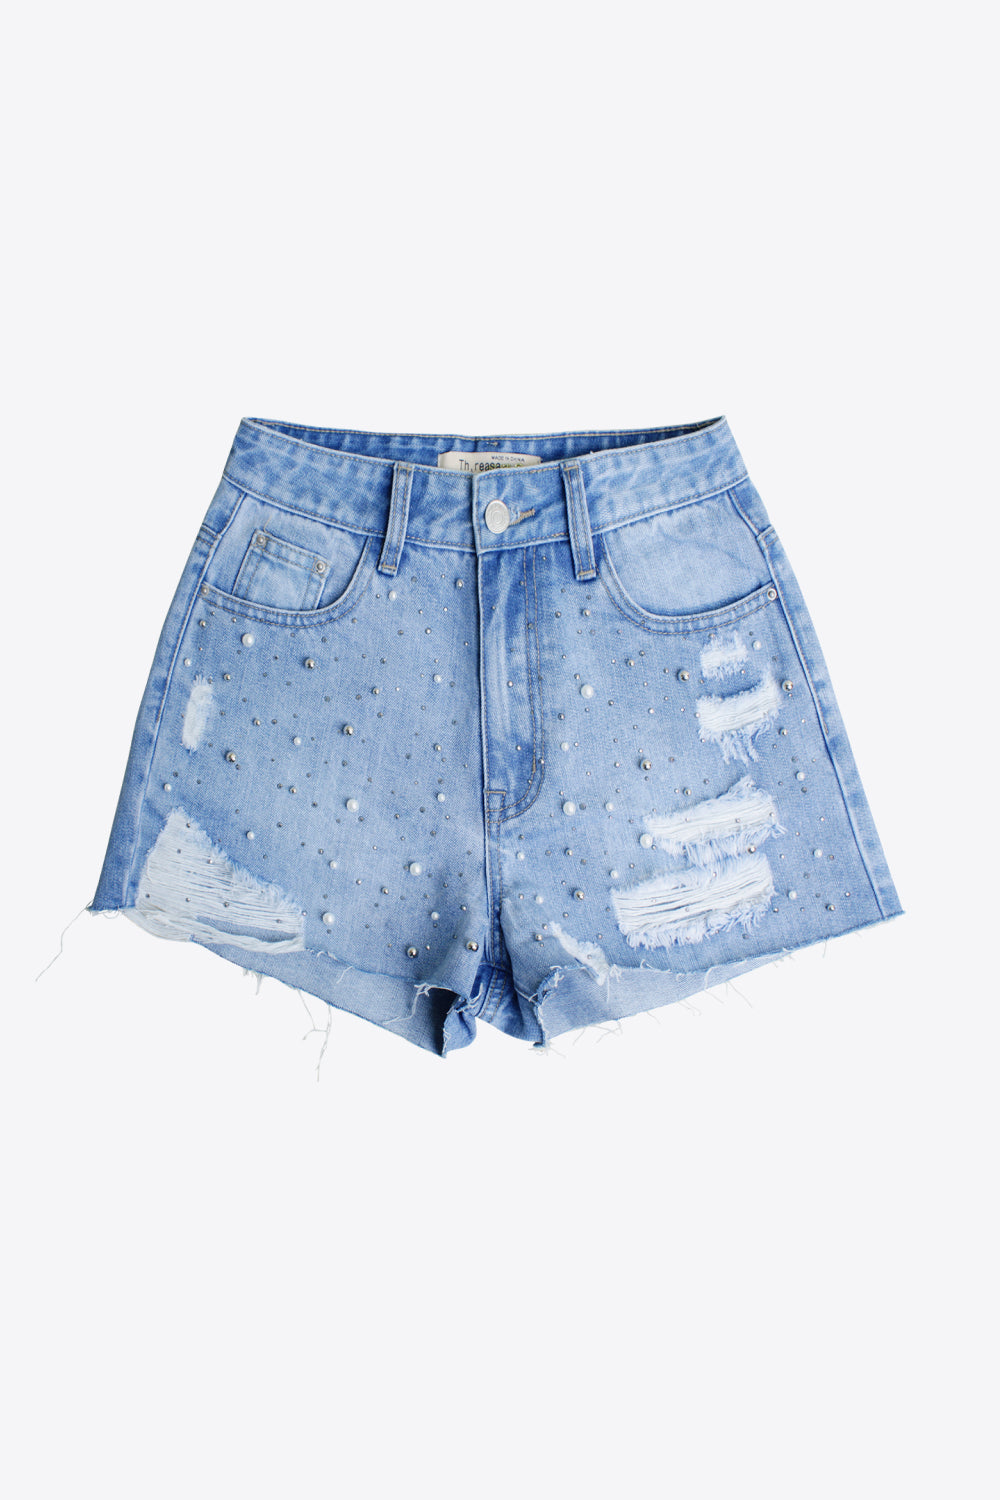 Let’s Go Girls Full Size Distressed Bead Denim Shorts - Cheeky Chic Boutique